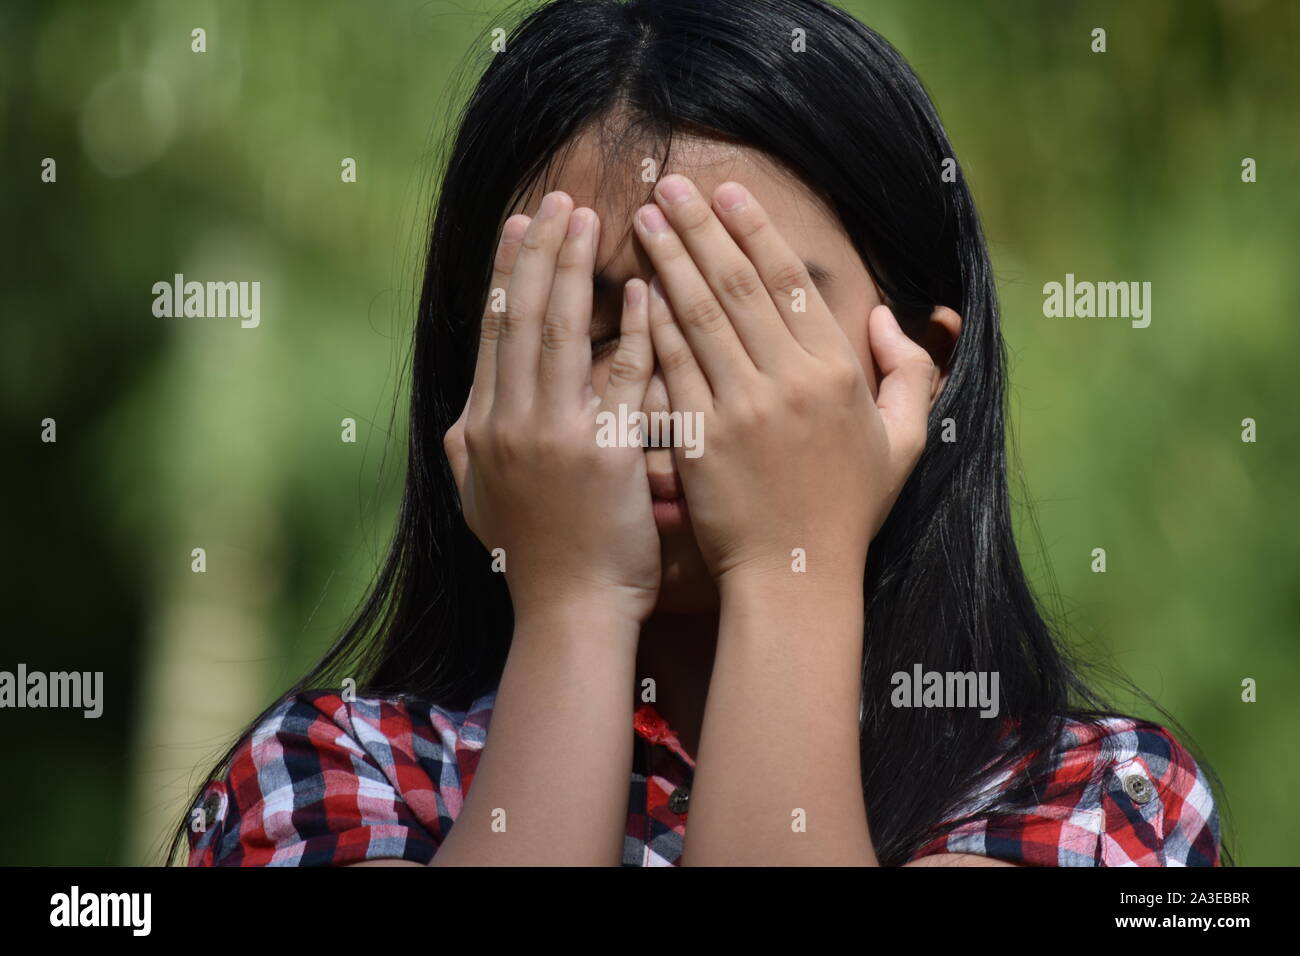 An Ashamed Petite Diverse Person Stock Photo